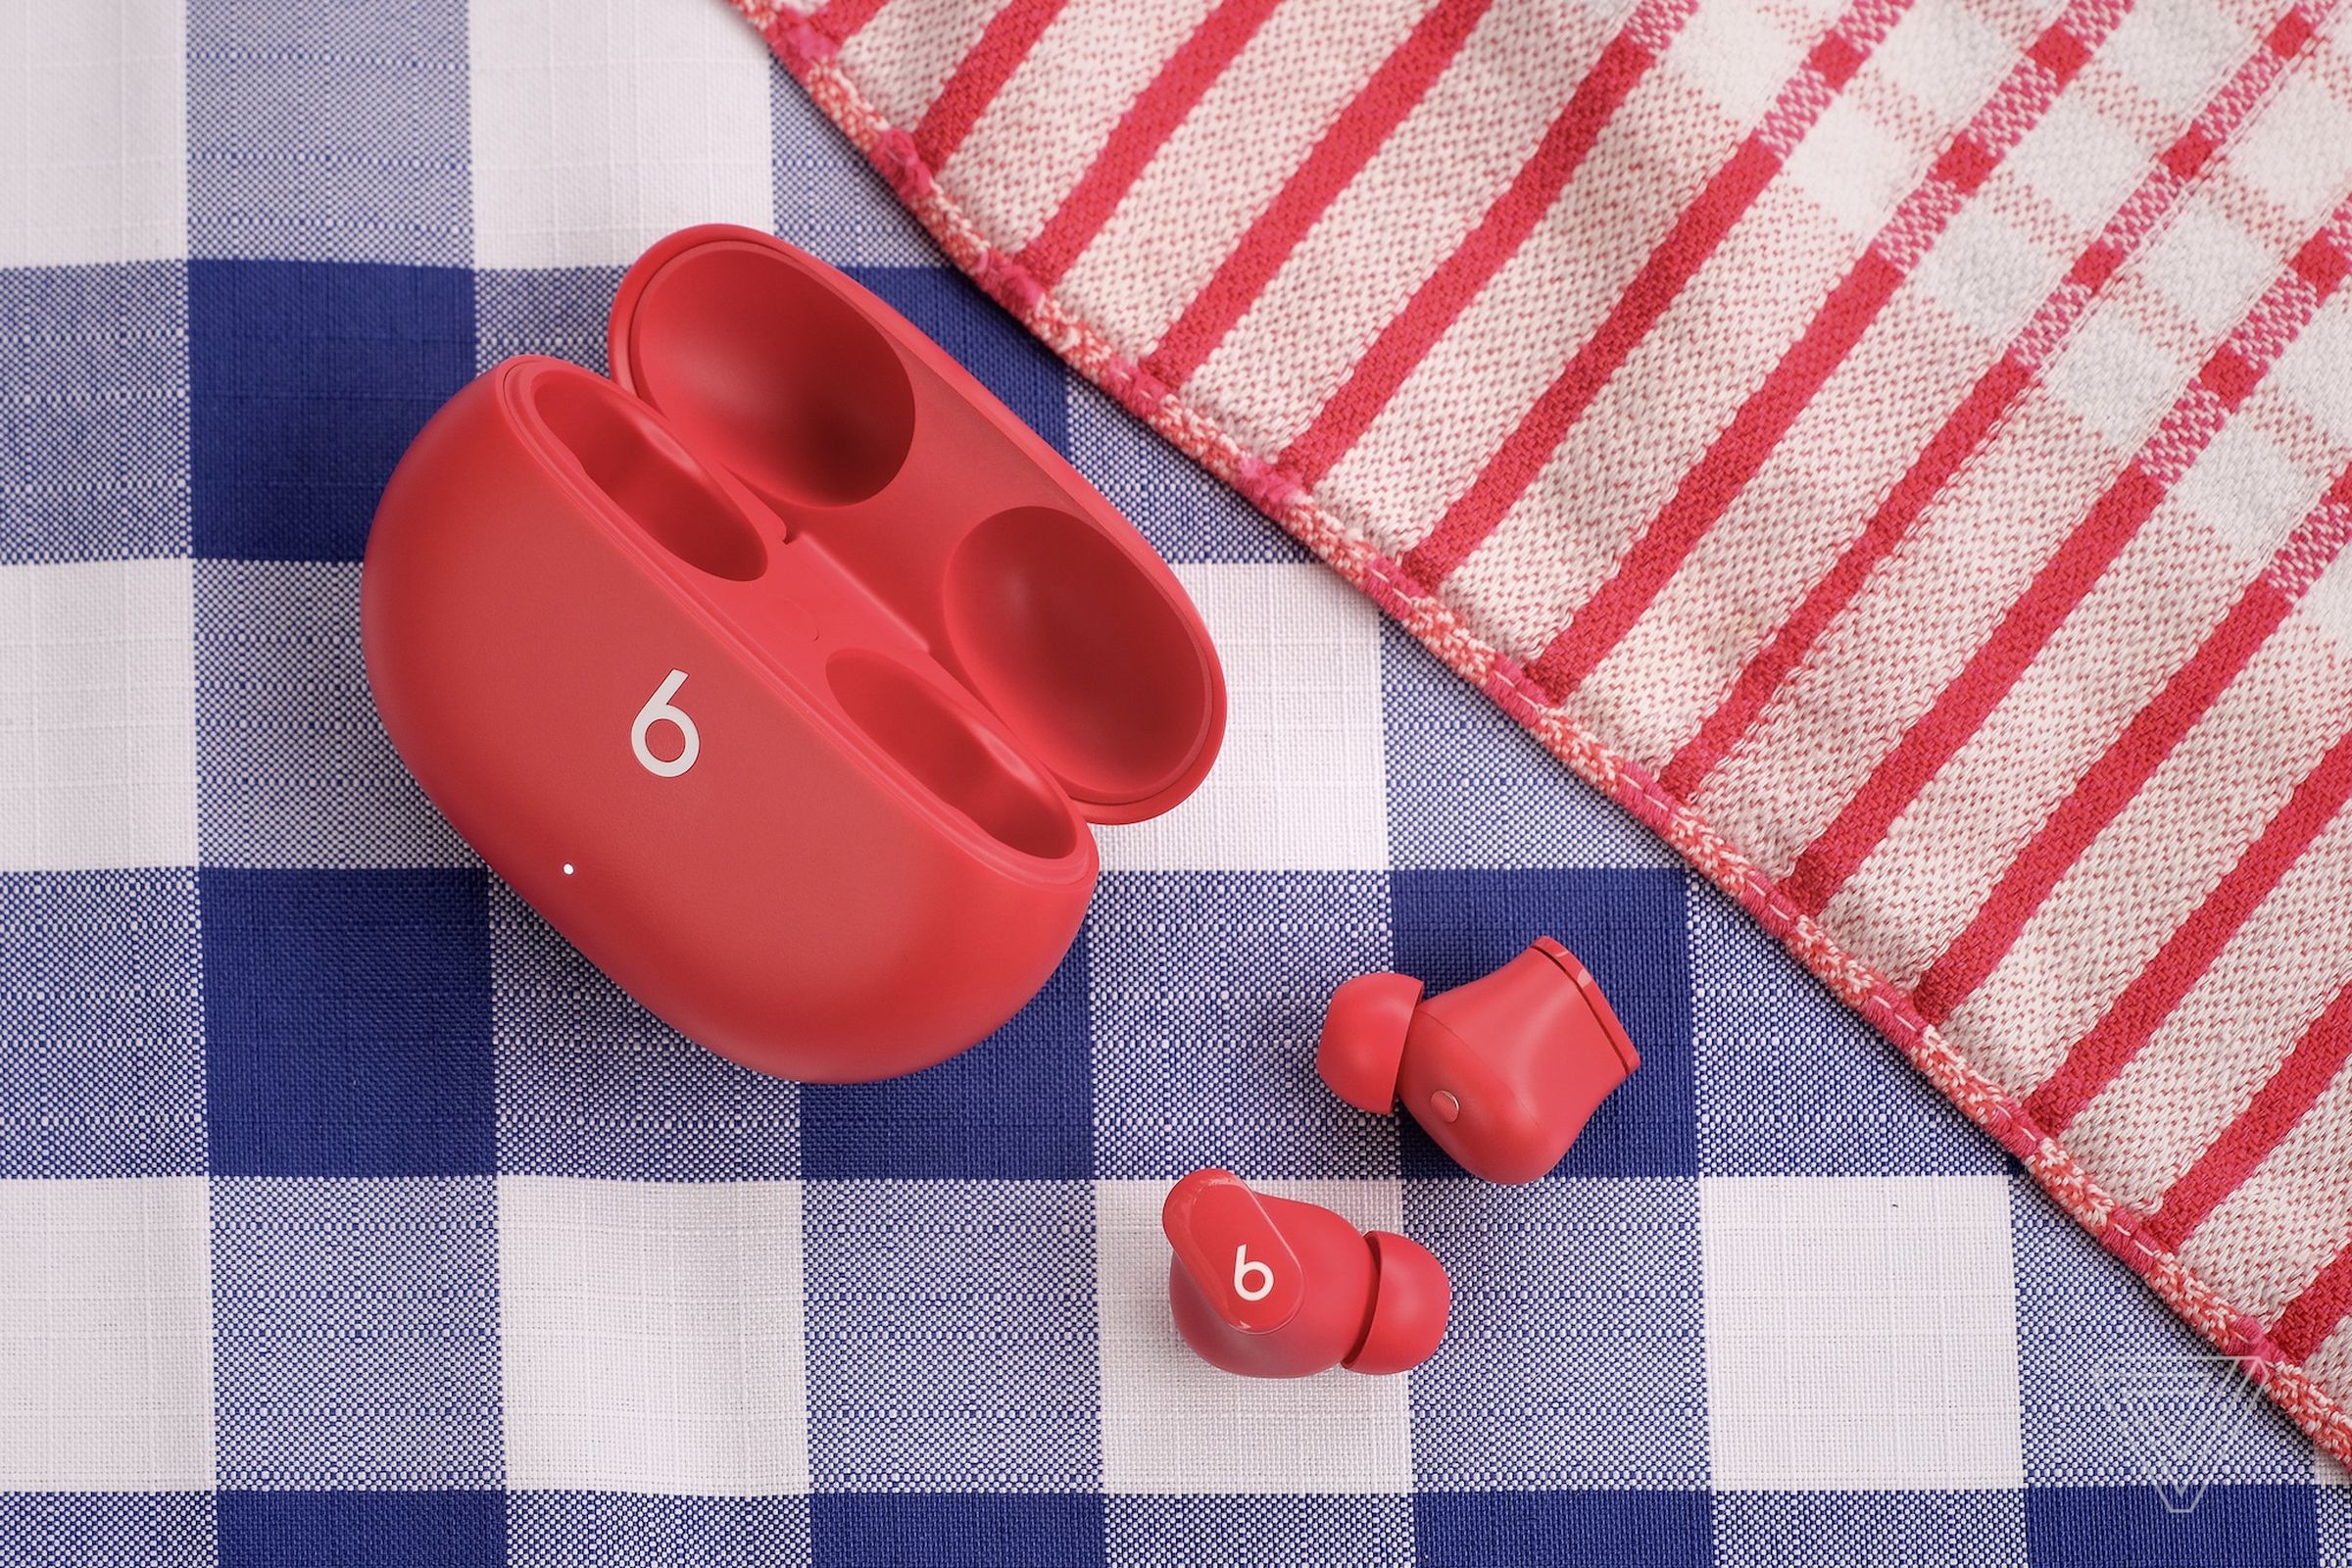 Right now, you can buy the Beats Studio Buds for $119.95, their second-best price to date, at Amazon and Best Buy. 